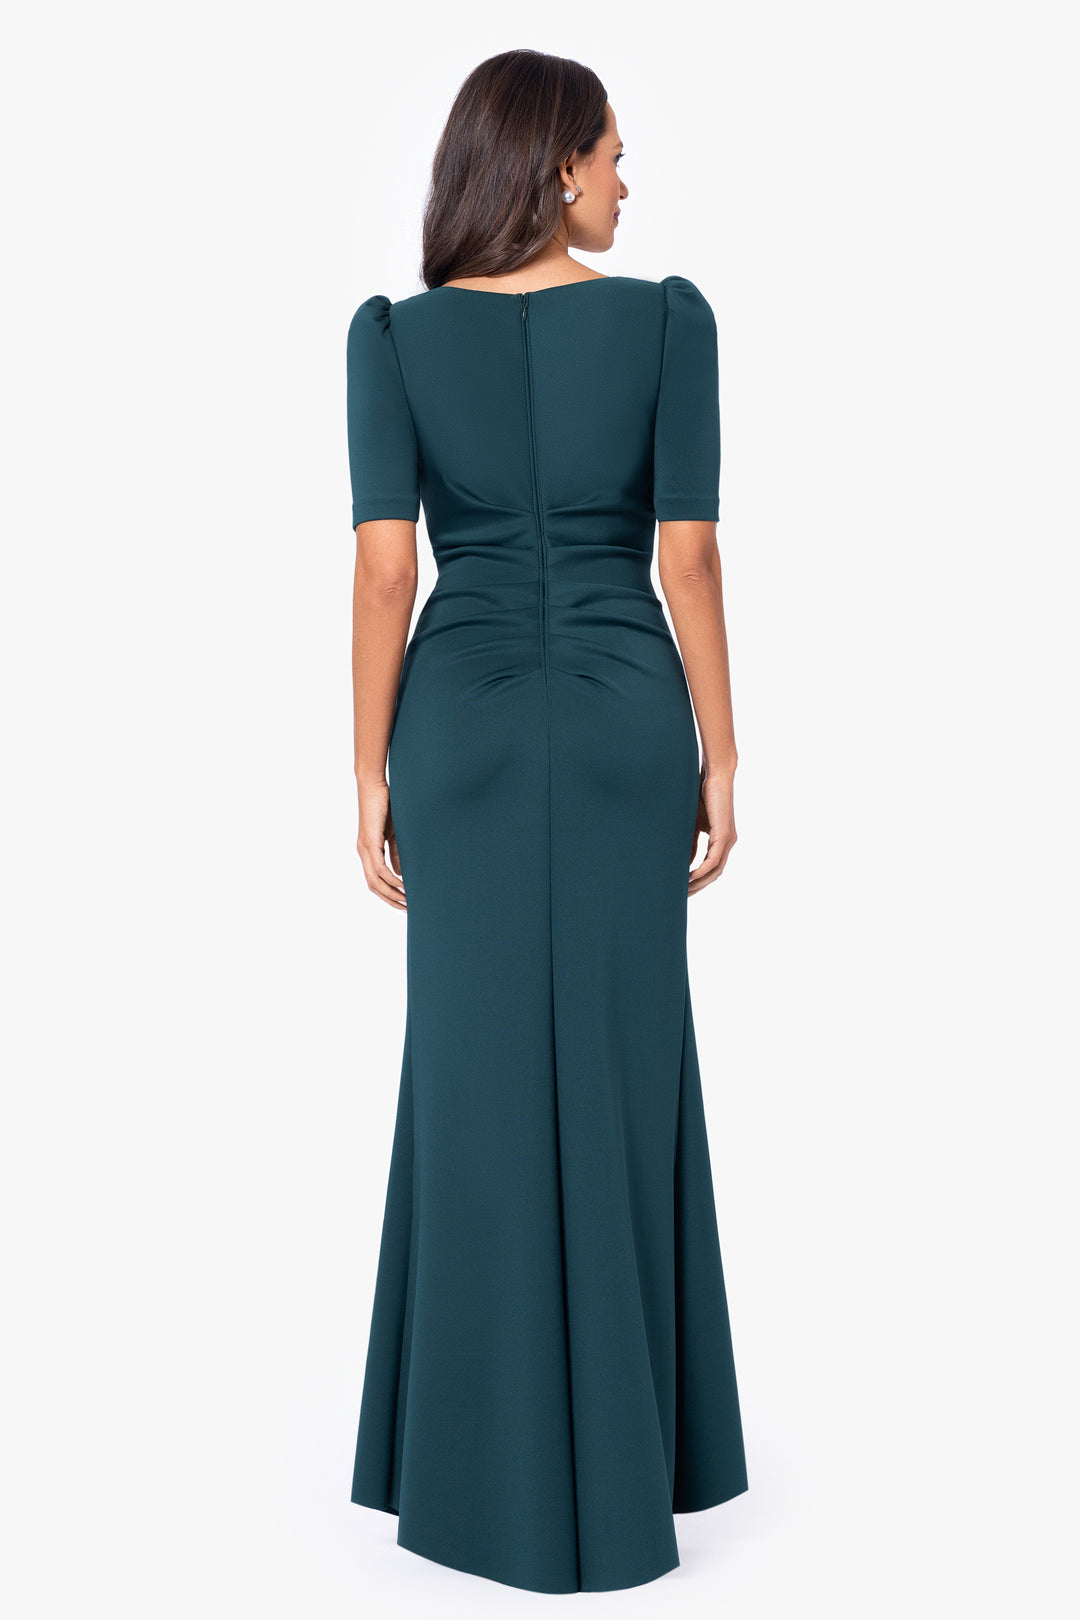 Petite "Demi" 3/4 Sleeve Side Ruched Floor Length Gown